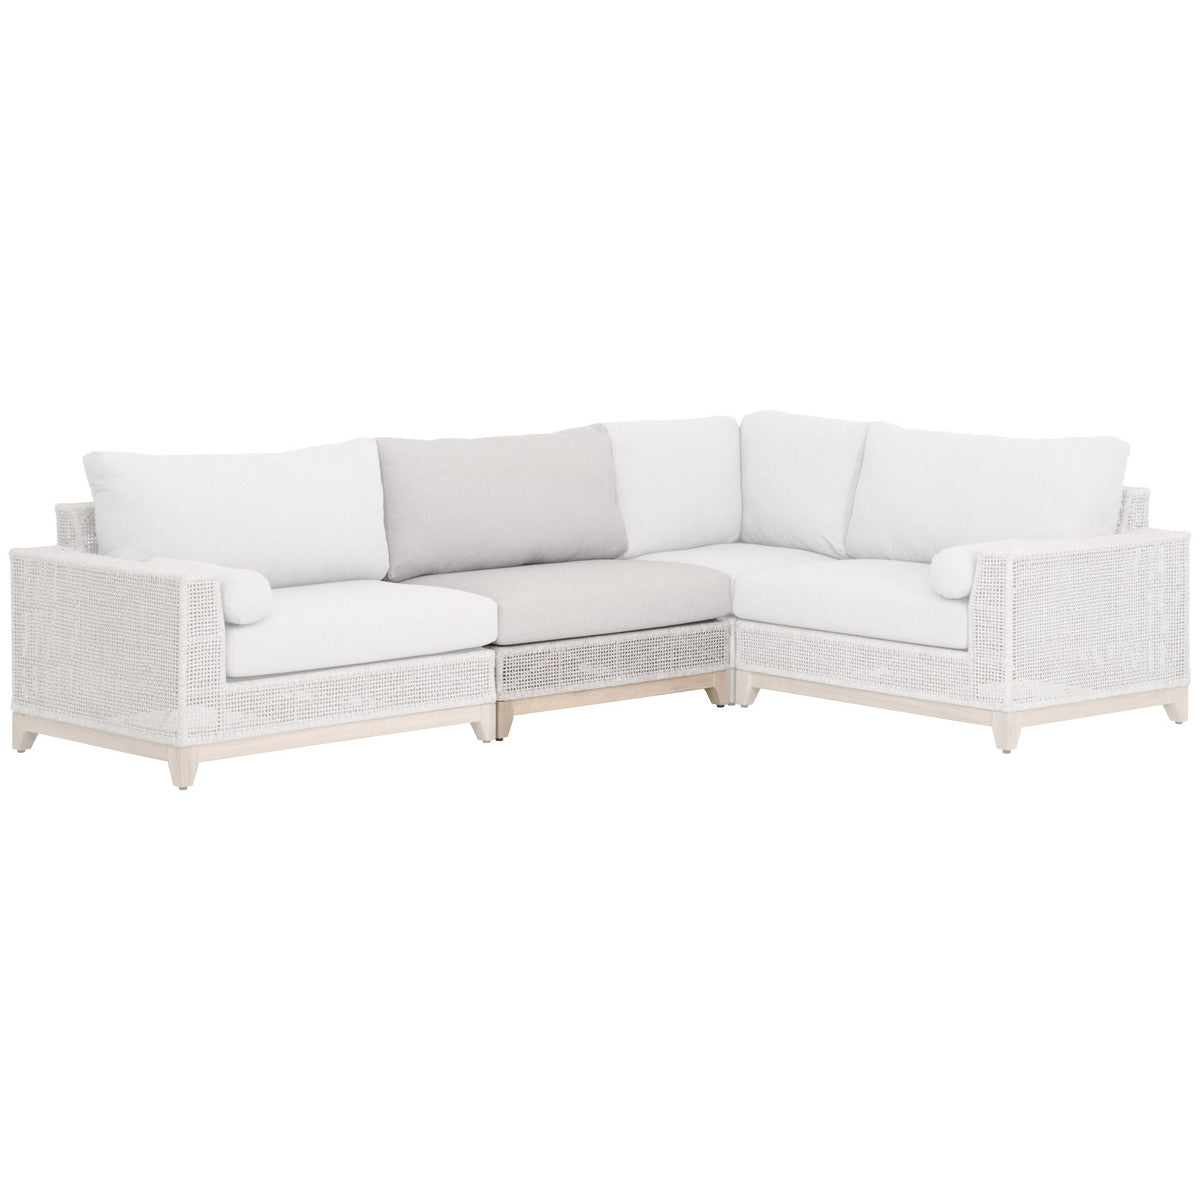 Tropez Outdoor Modular Armless Sofa Chair in Taupe & White Flat Rope, Performance Pumice, Gray Teak - 6843-1S.WTA/PUM/GT